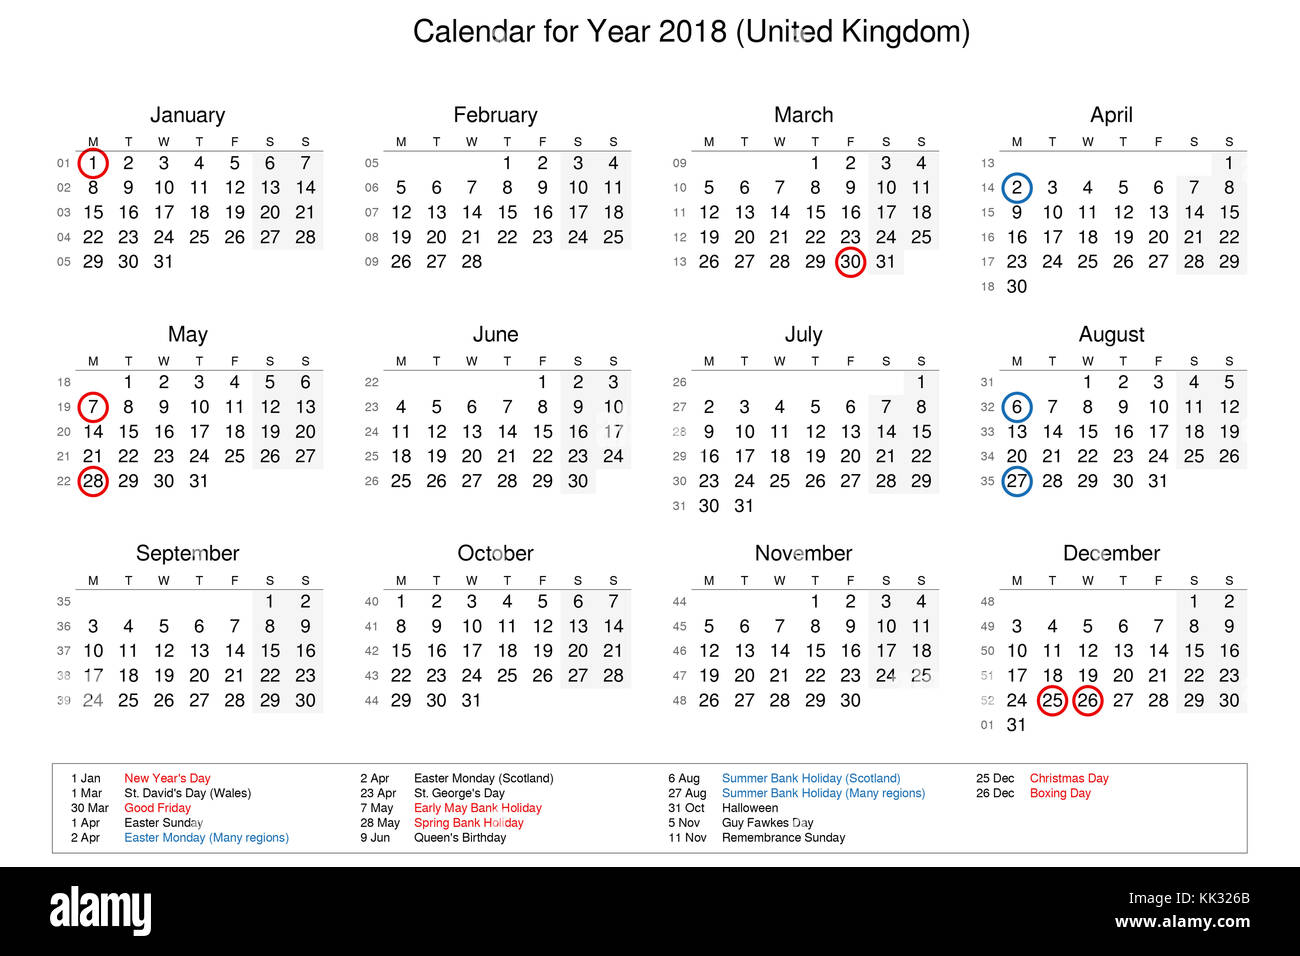 Calendar of year 2018 with public holidays and bank holidays for United  Kingdom Stock Photo - Alamy